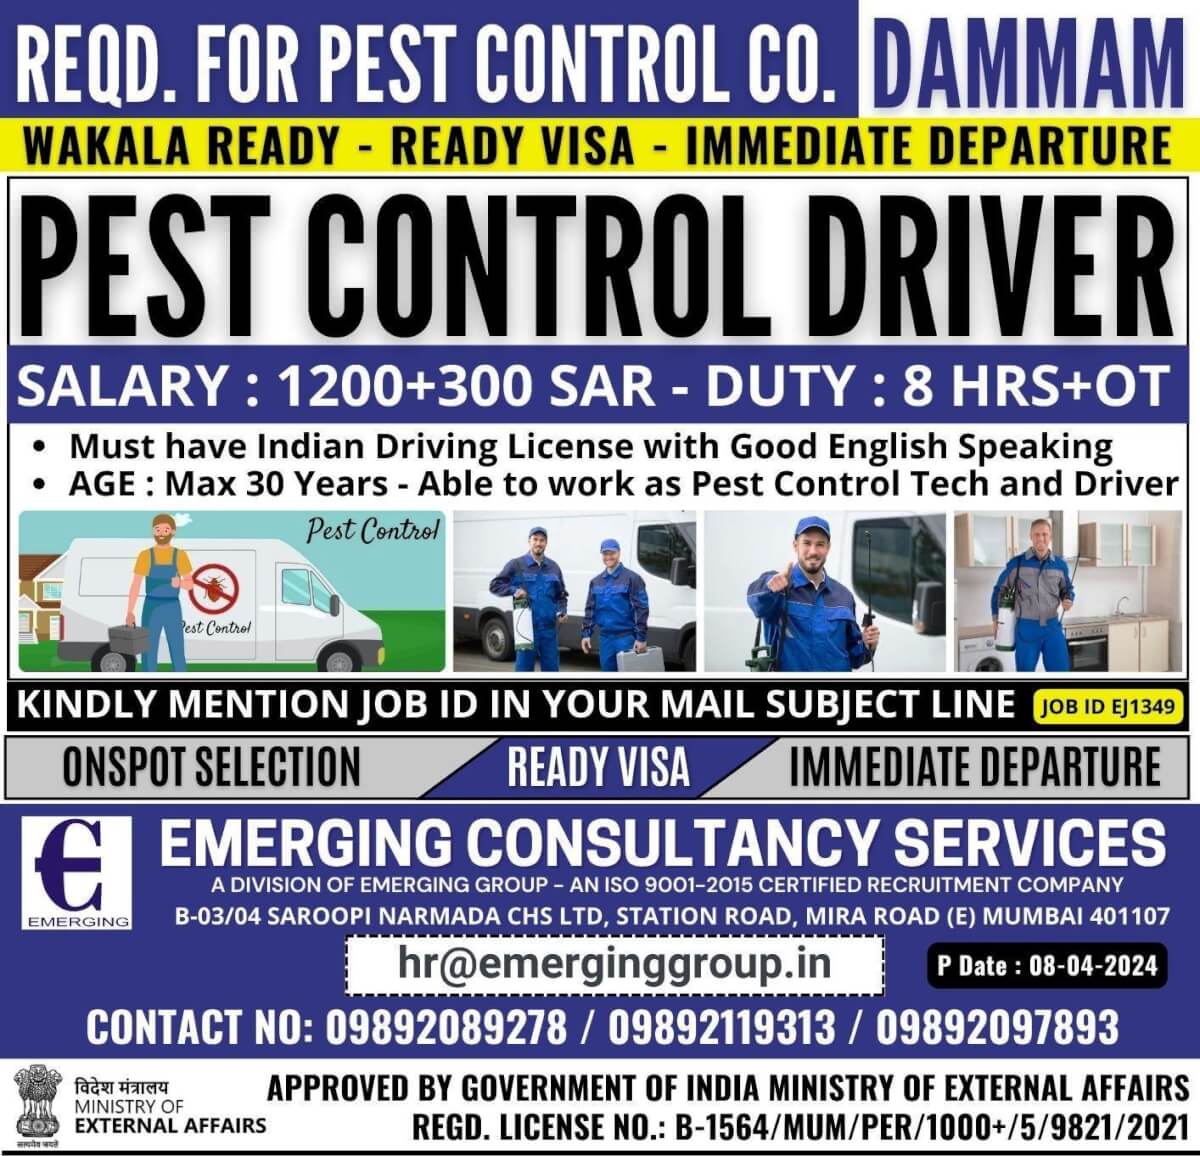 WAKALA READY - READY VISA - IMMEDIATE DEPARTURE FOR PEST CONTROL DRIVER